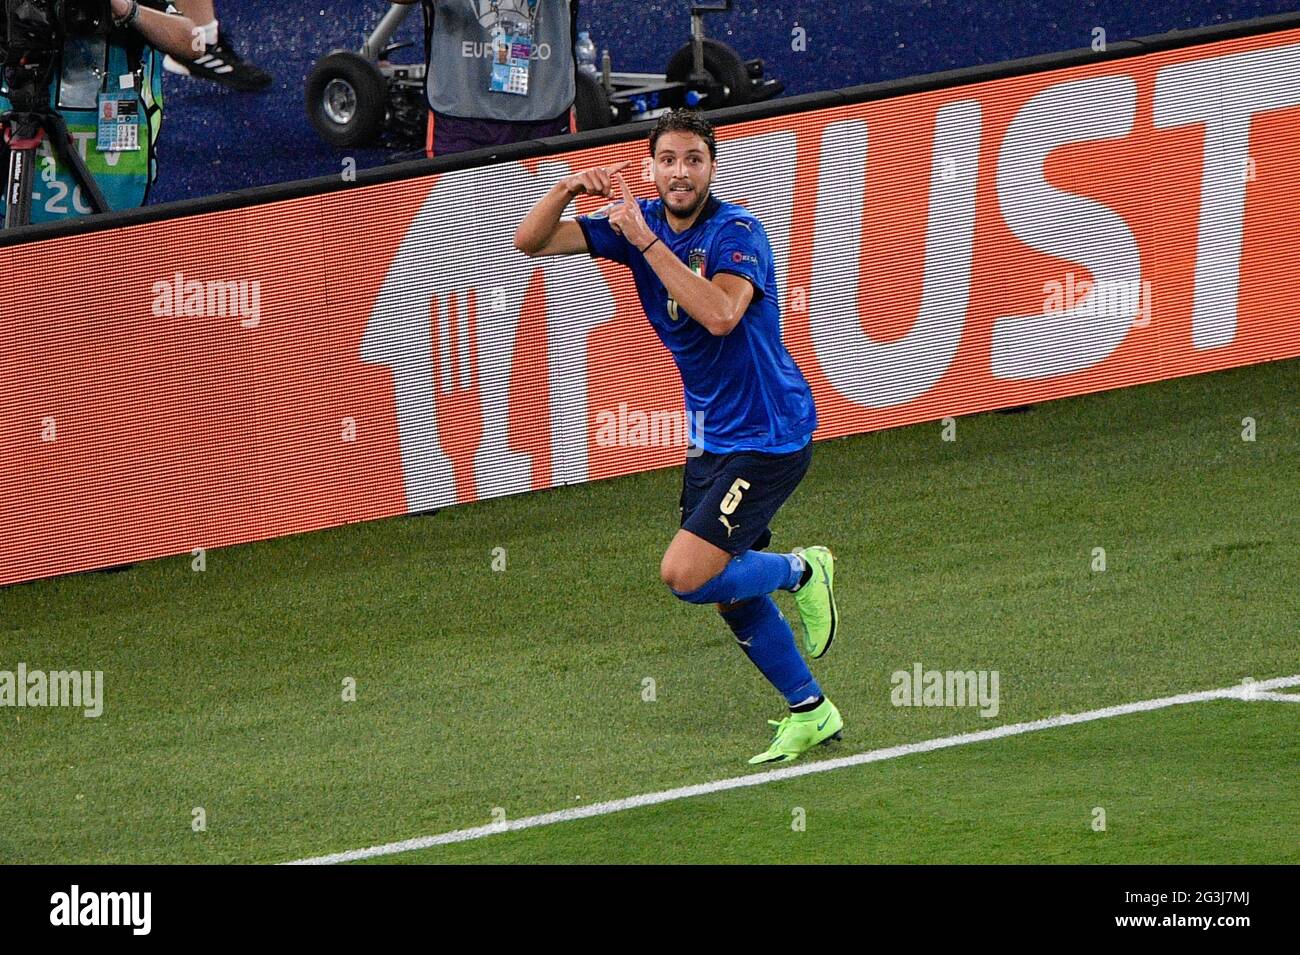 Manuel Locatelli of Italy celebrates after scoring goal 1-0 seen in action  during the UEFA Euro 2020 Group A - Italy vs Switzerland at the Olimpic  Stadium in Rome. / LM Stock Photo - Alamy